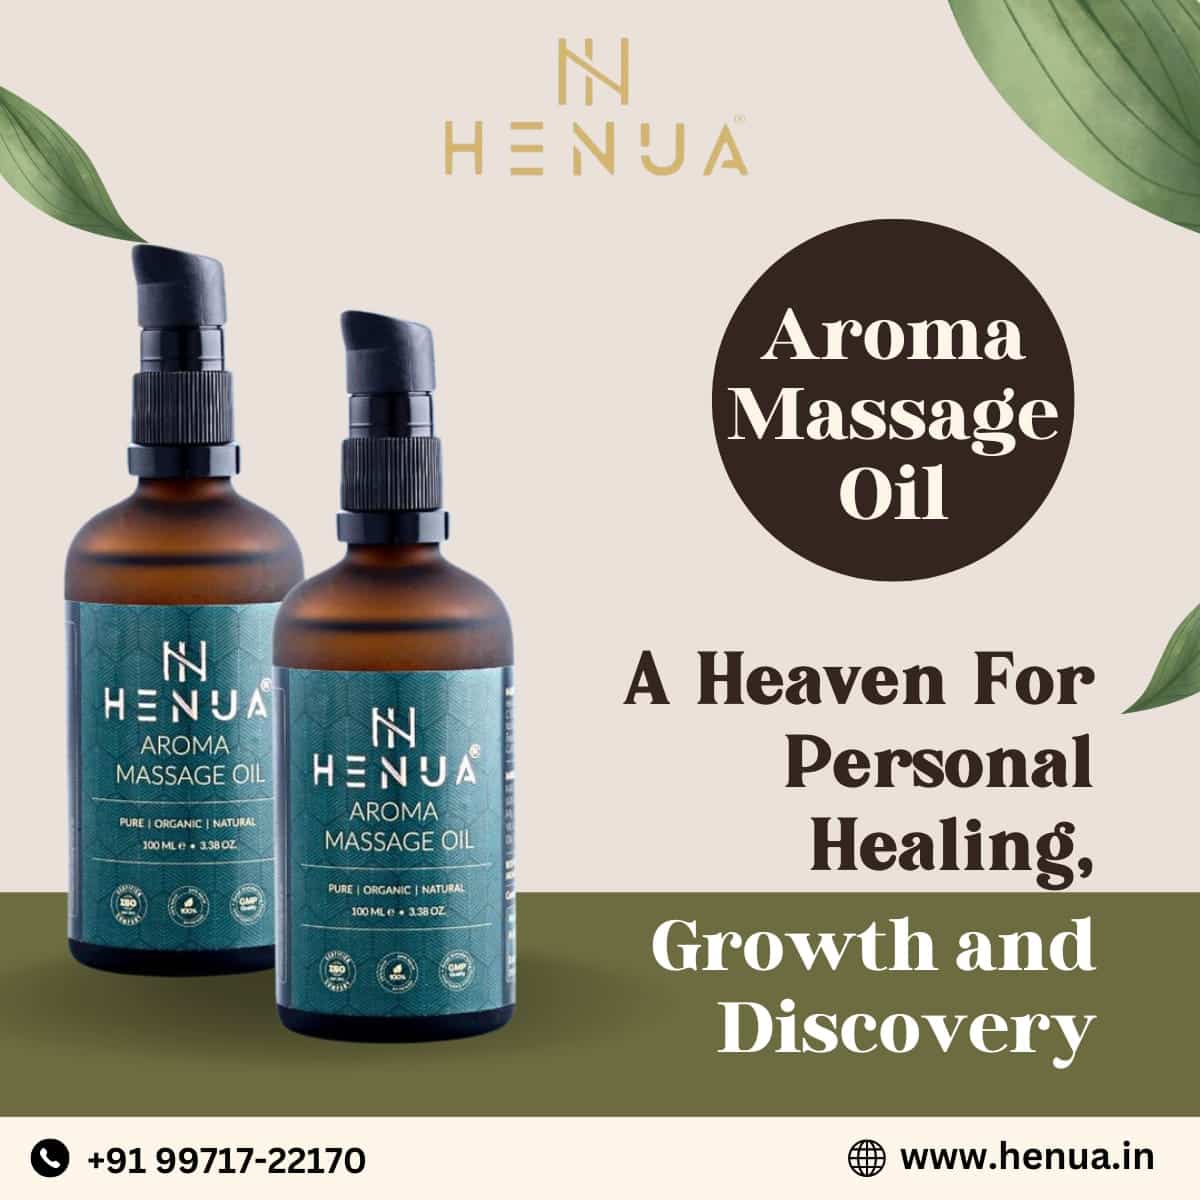 With-Henua-Aroma-Massage-Oil-Heal-From-Inside